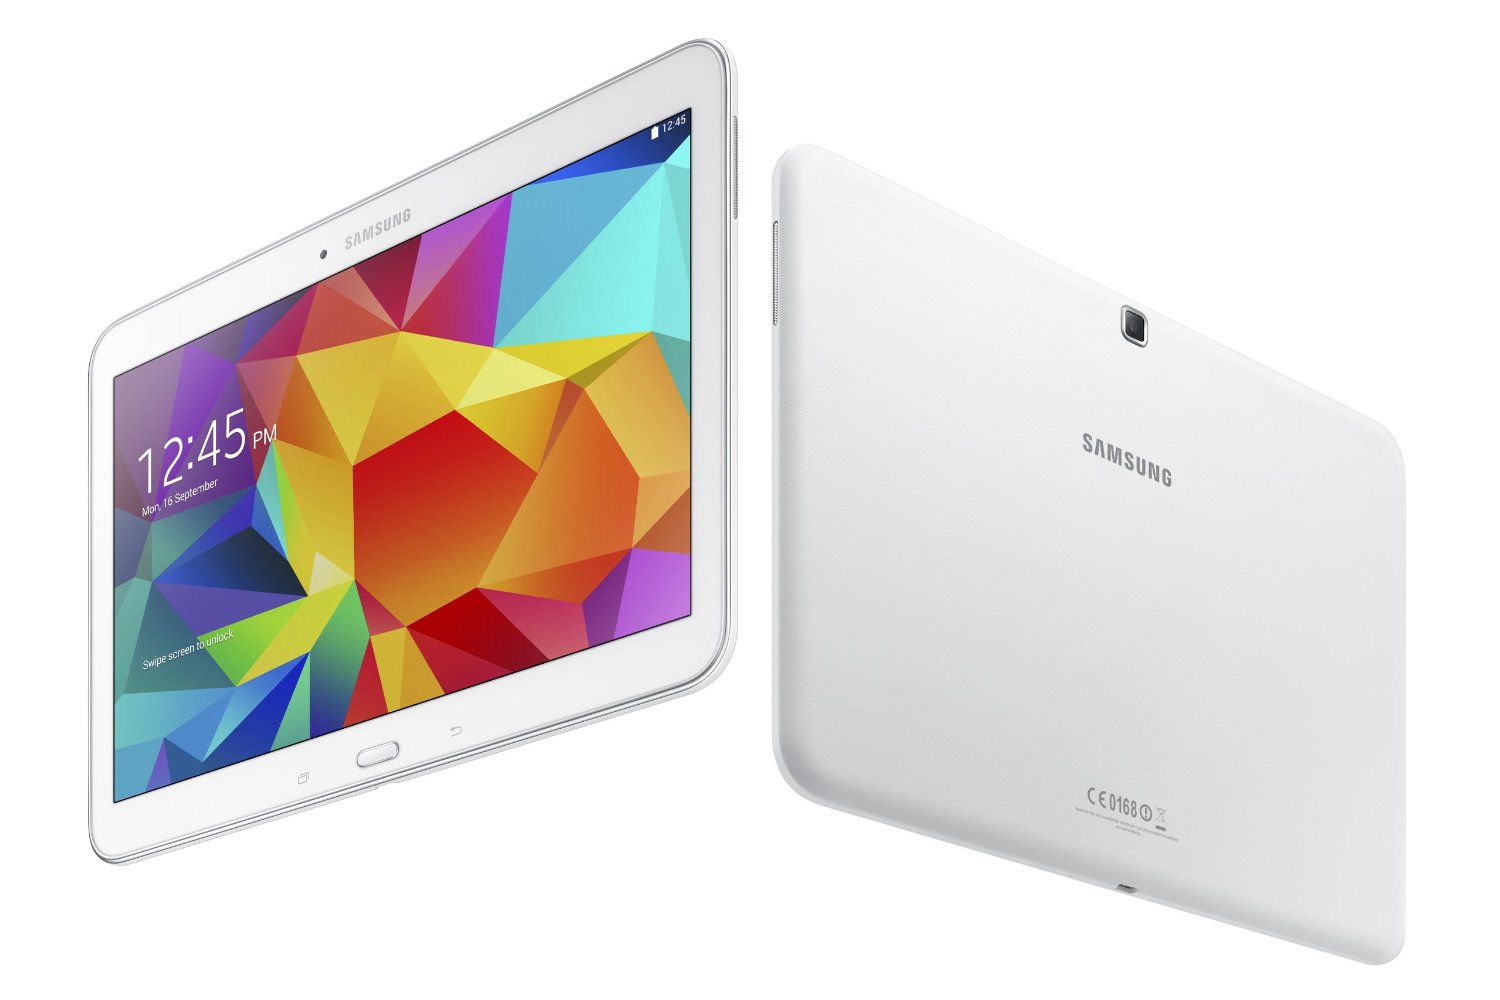 Dwell clay get annoyed Samsung Rolls Out Android 5.0.2 Lollipop for Galaxy Tab 4 10.1